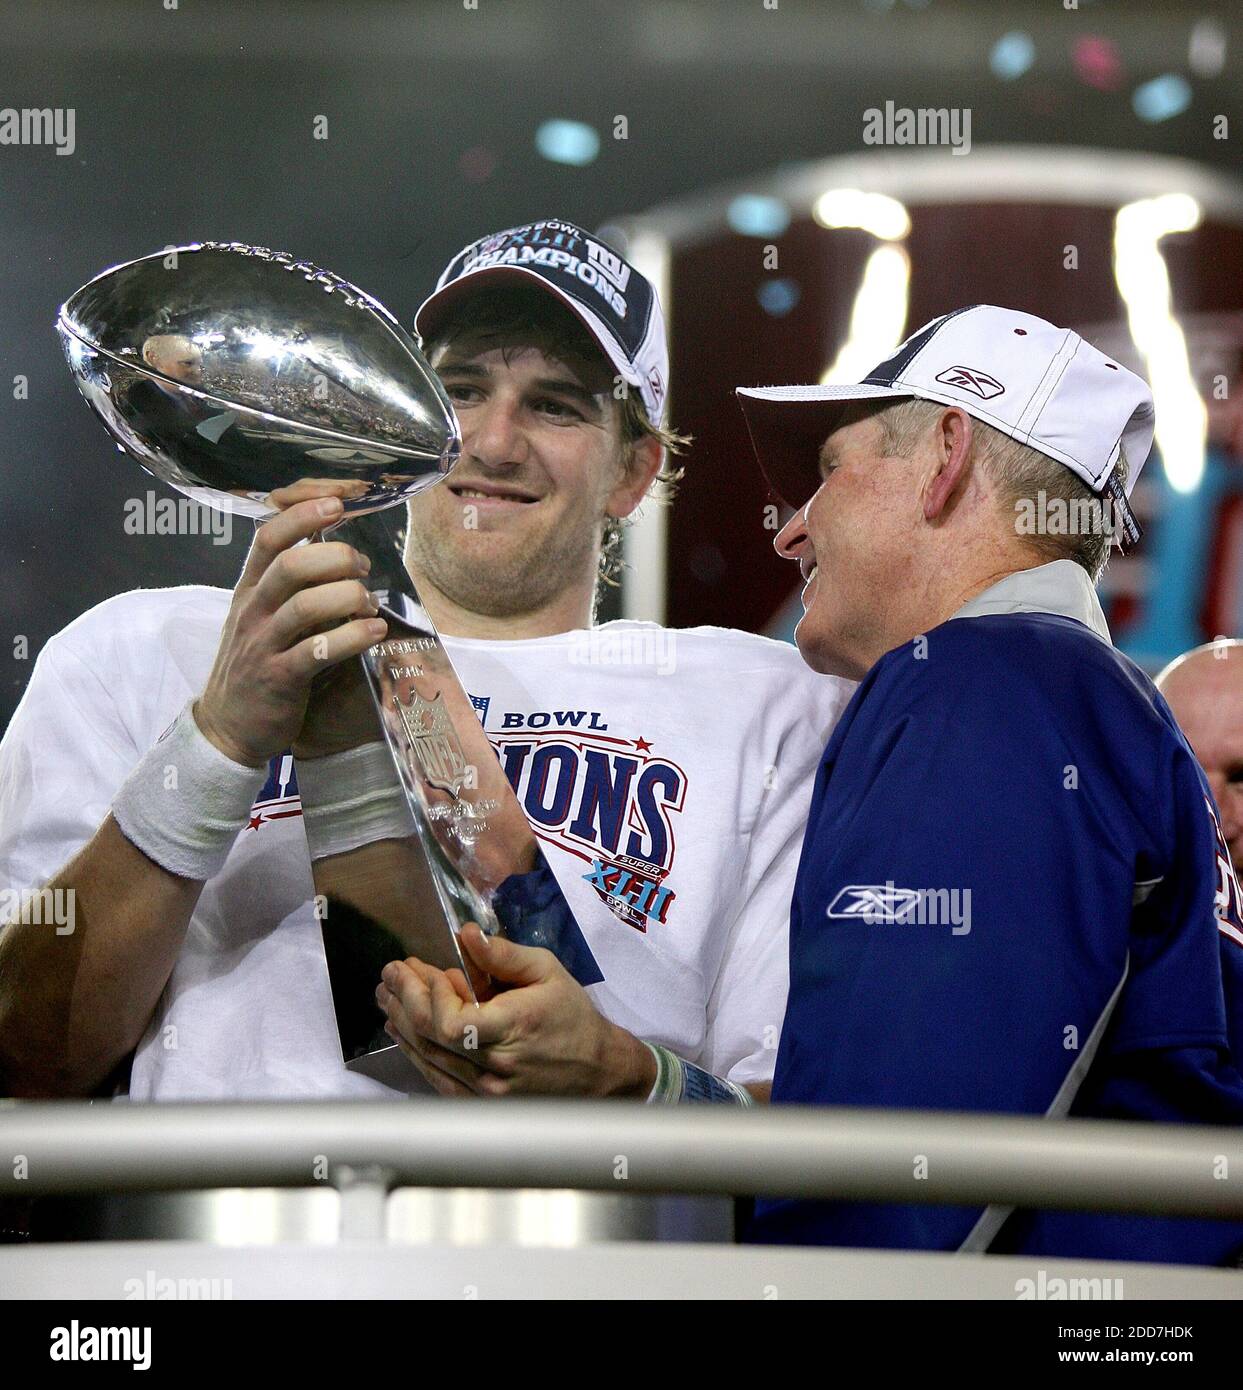 The New York Giants' quarterback Eli Manning and coach Tom Coughlin hold the Lombardi Trophy after a 17-14 Giants' victory in Super Bowl XLII at University of Phoenix Stadium in Glendale, AZ, USA on February 3, 2008.  The NY Giants won 17-14. Photo by Gary W. Green/MCT/Cameleon/ABACAPRESS.COM Stock Photo